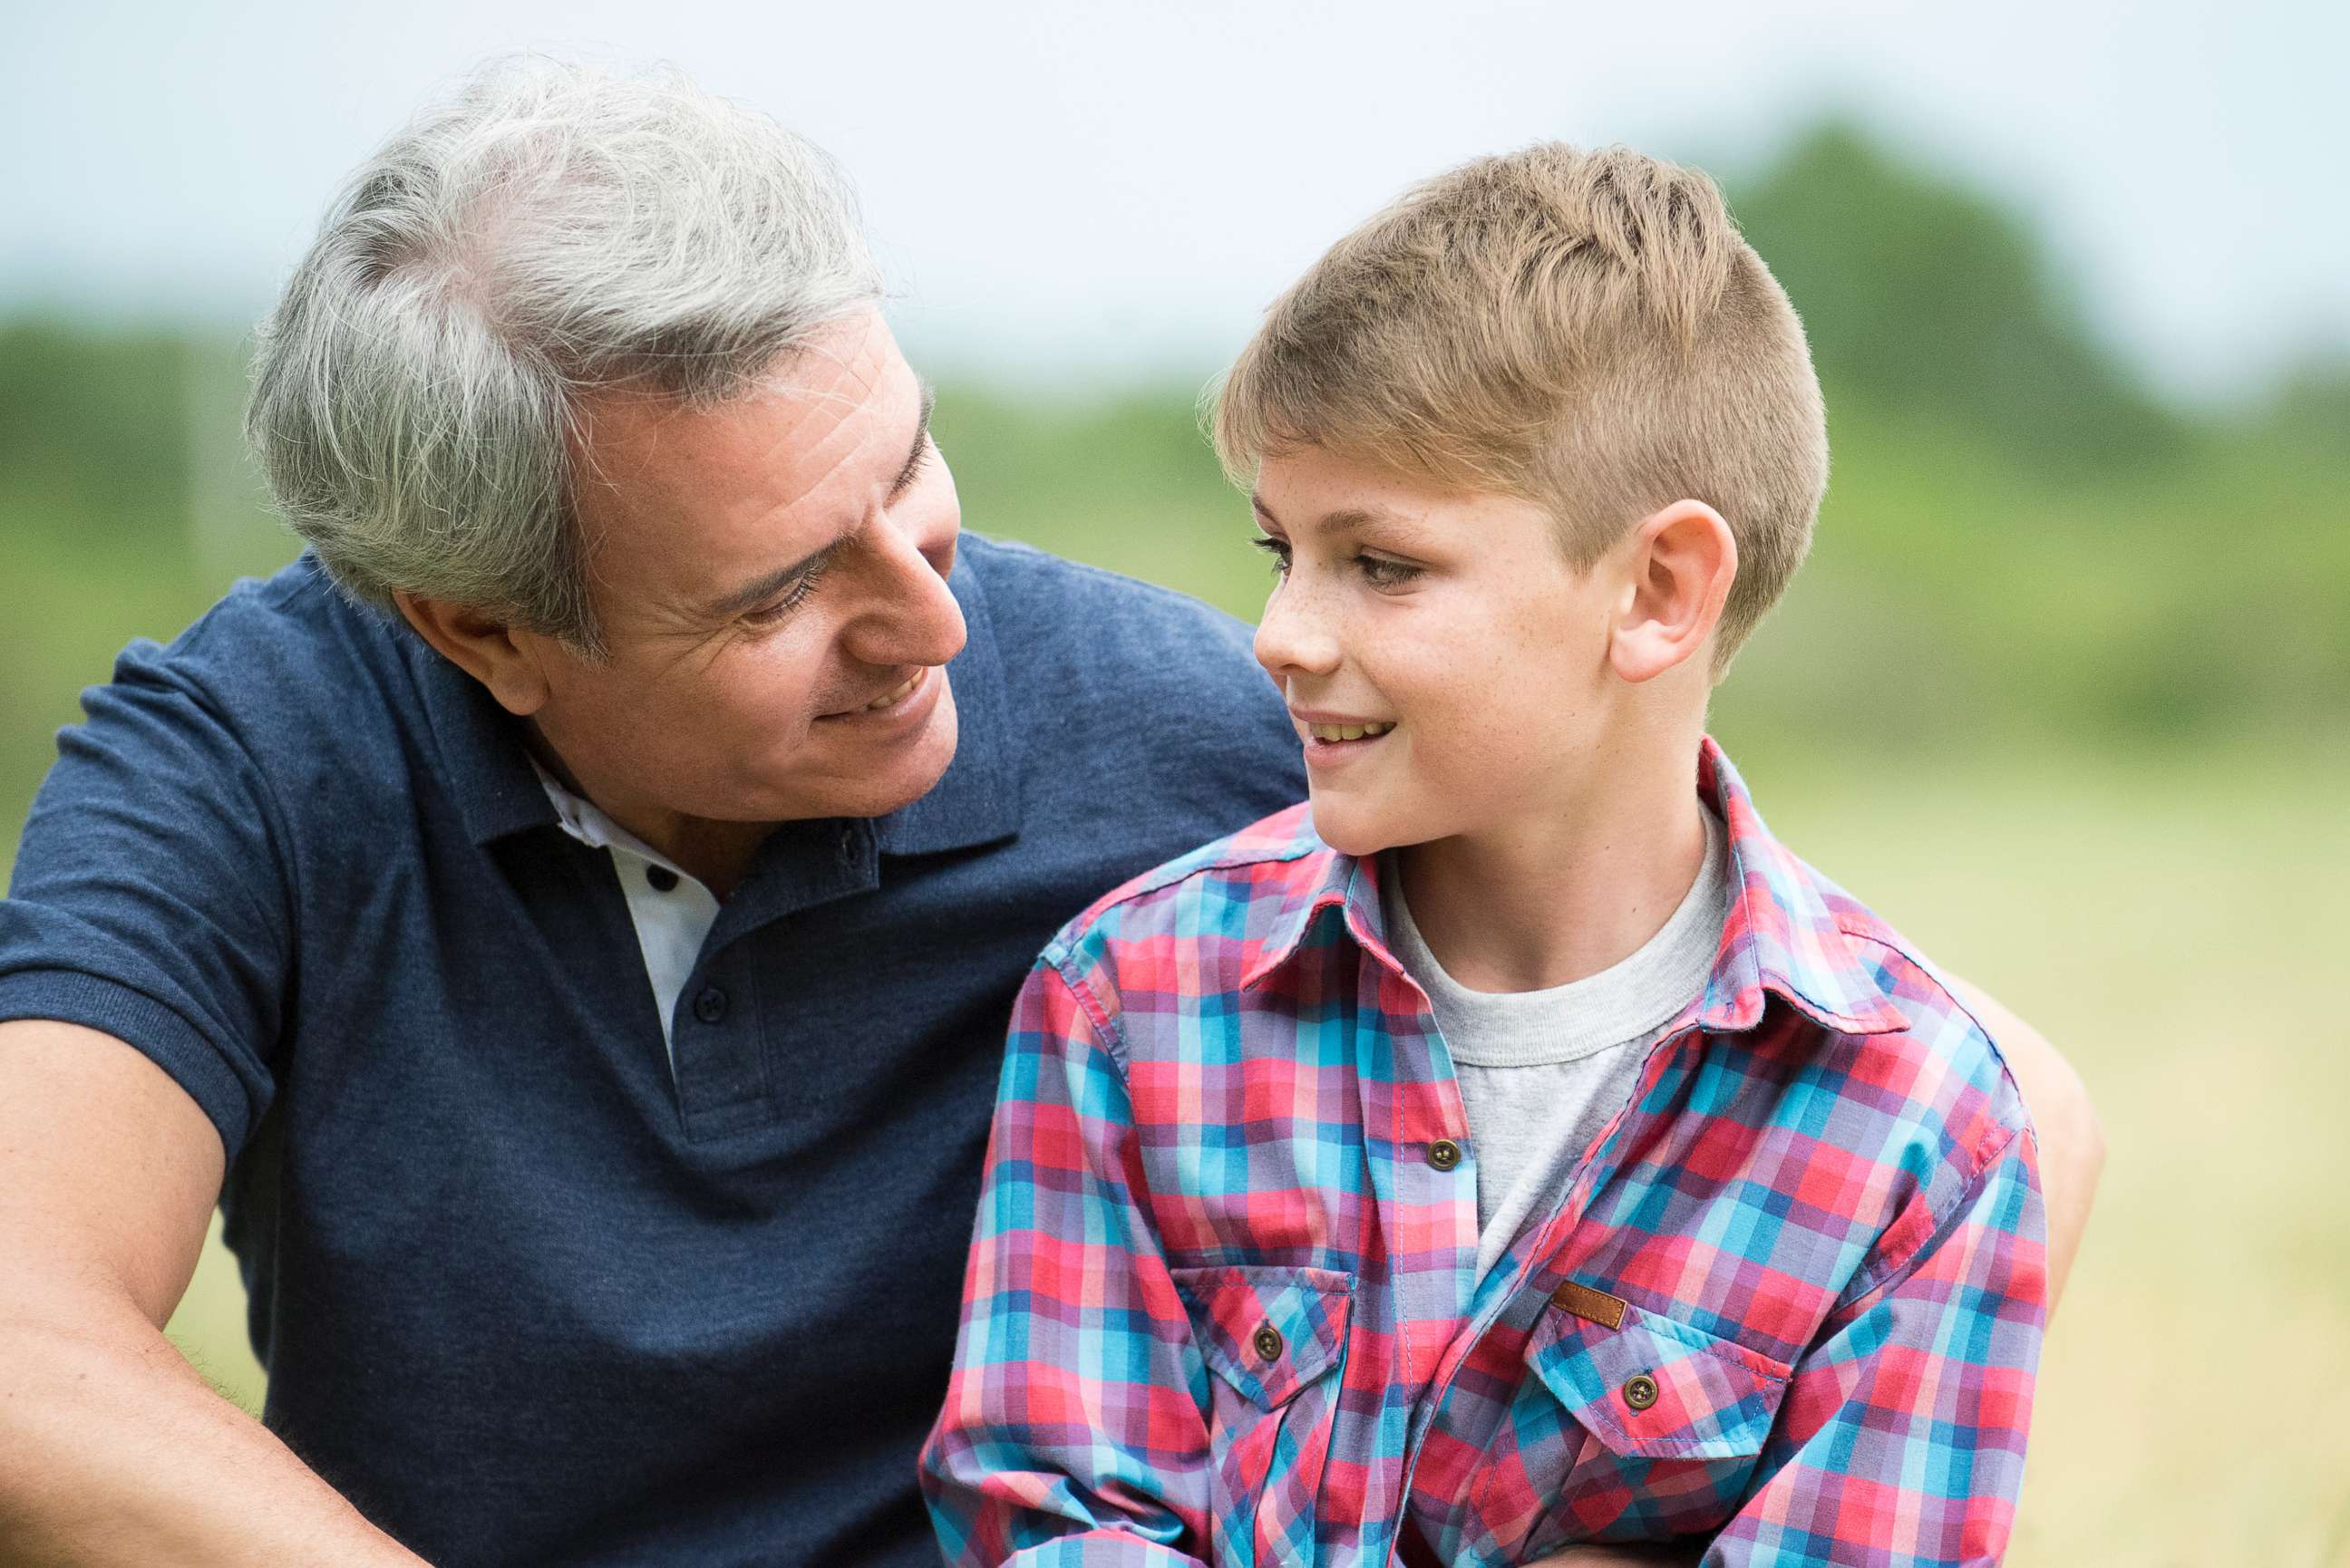 PHOTO: In this undated stock photo, a father has a conversation with his son.